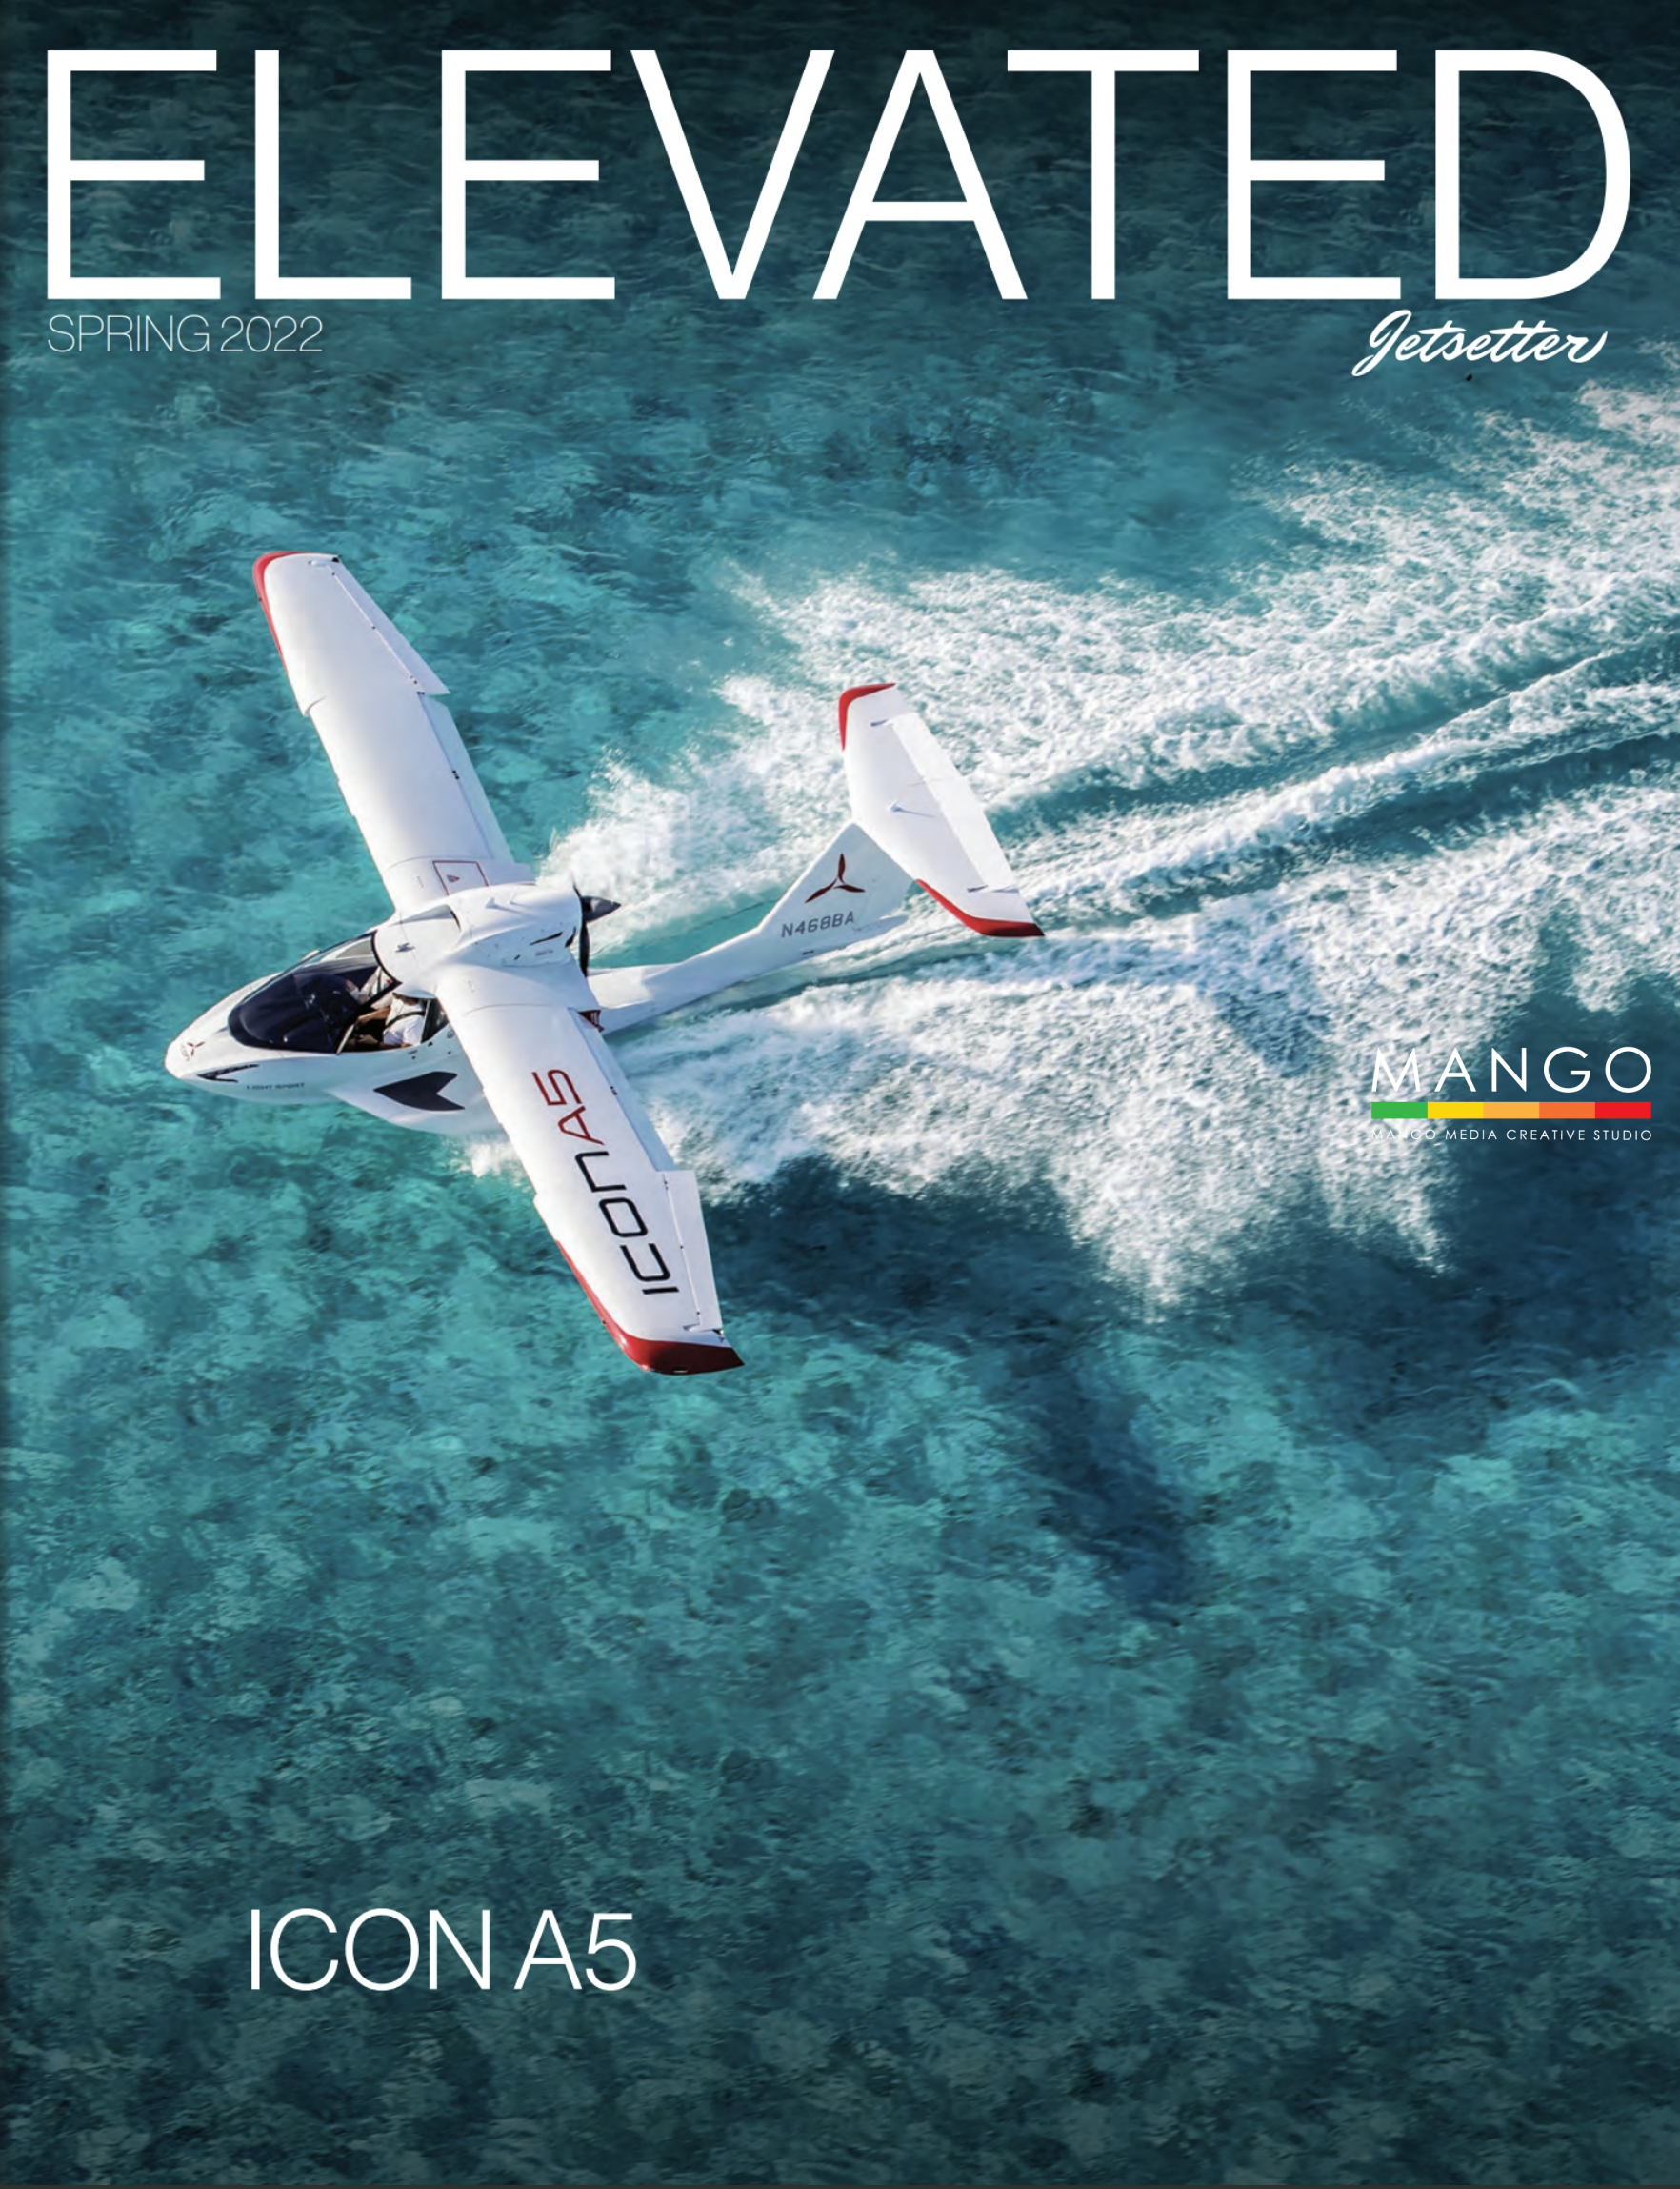 Standard Aviation Photos featured in Elevated Jetsetter Spring 2022